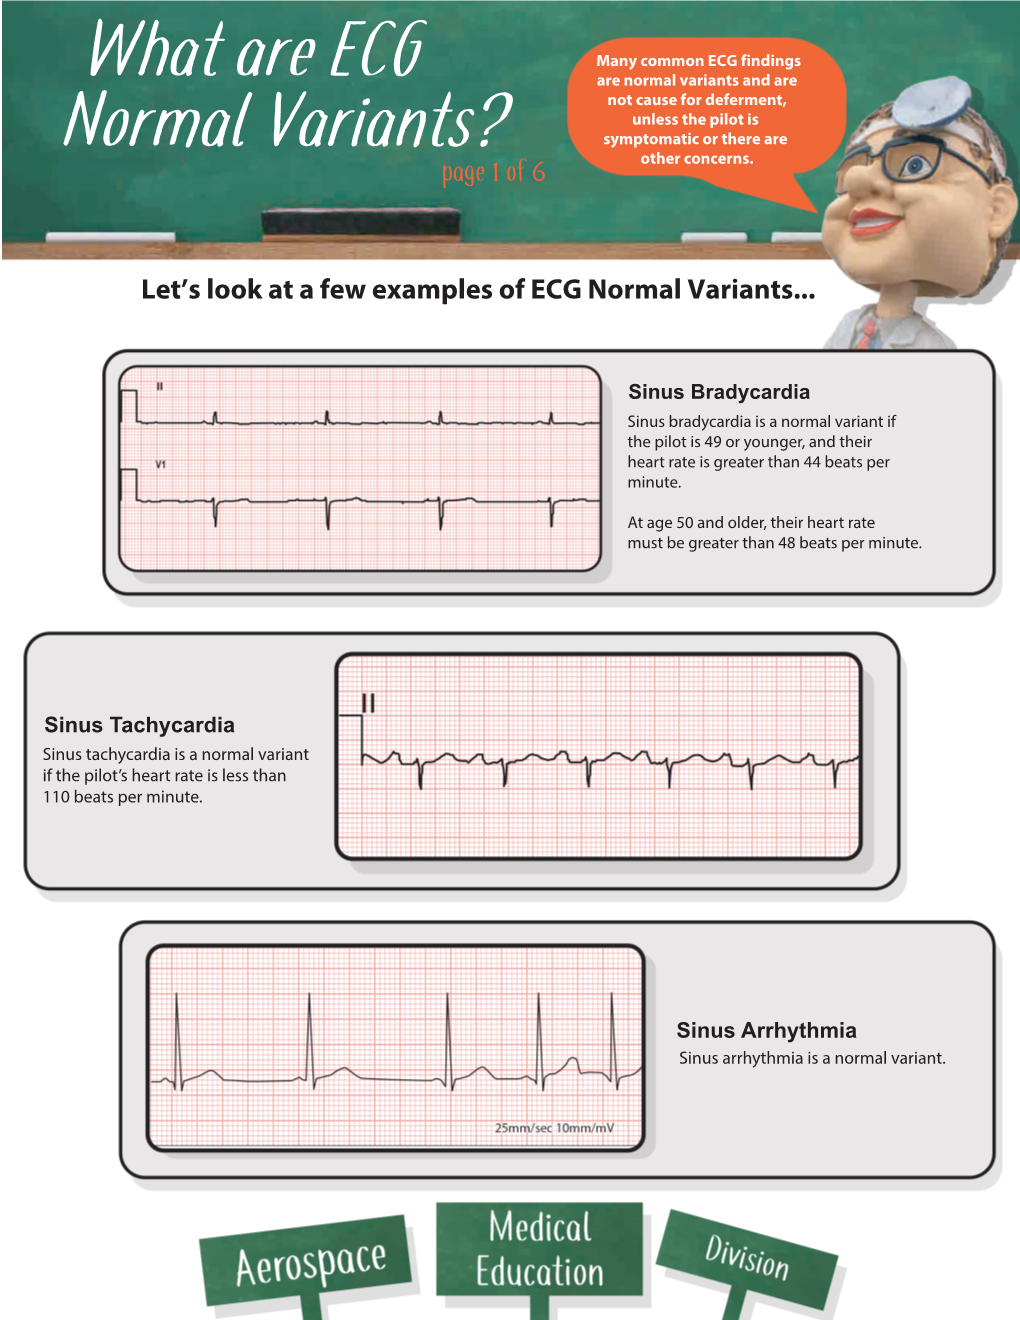 What Are ECG Normal Variants?